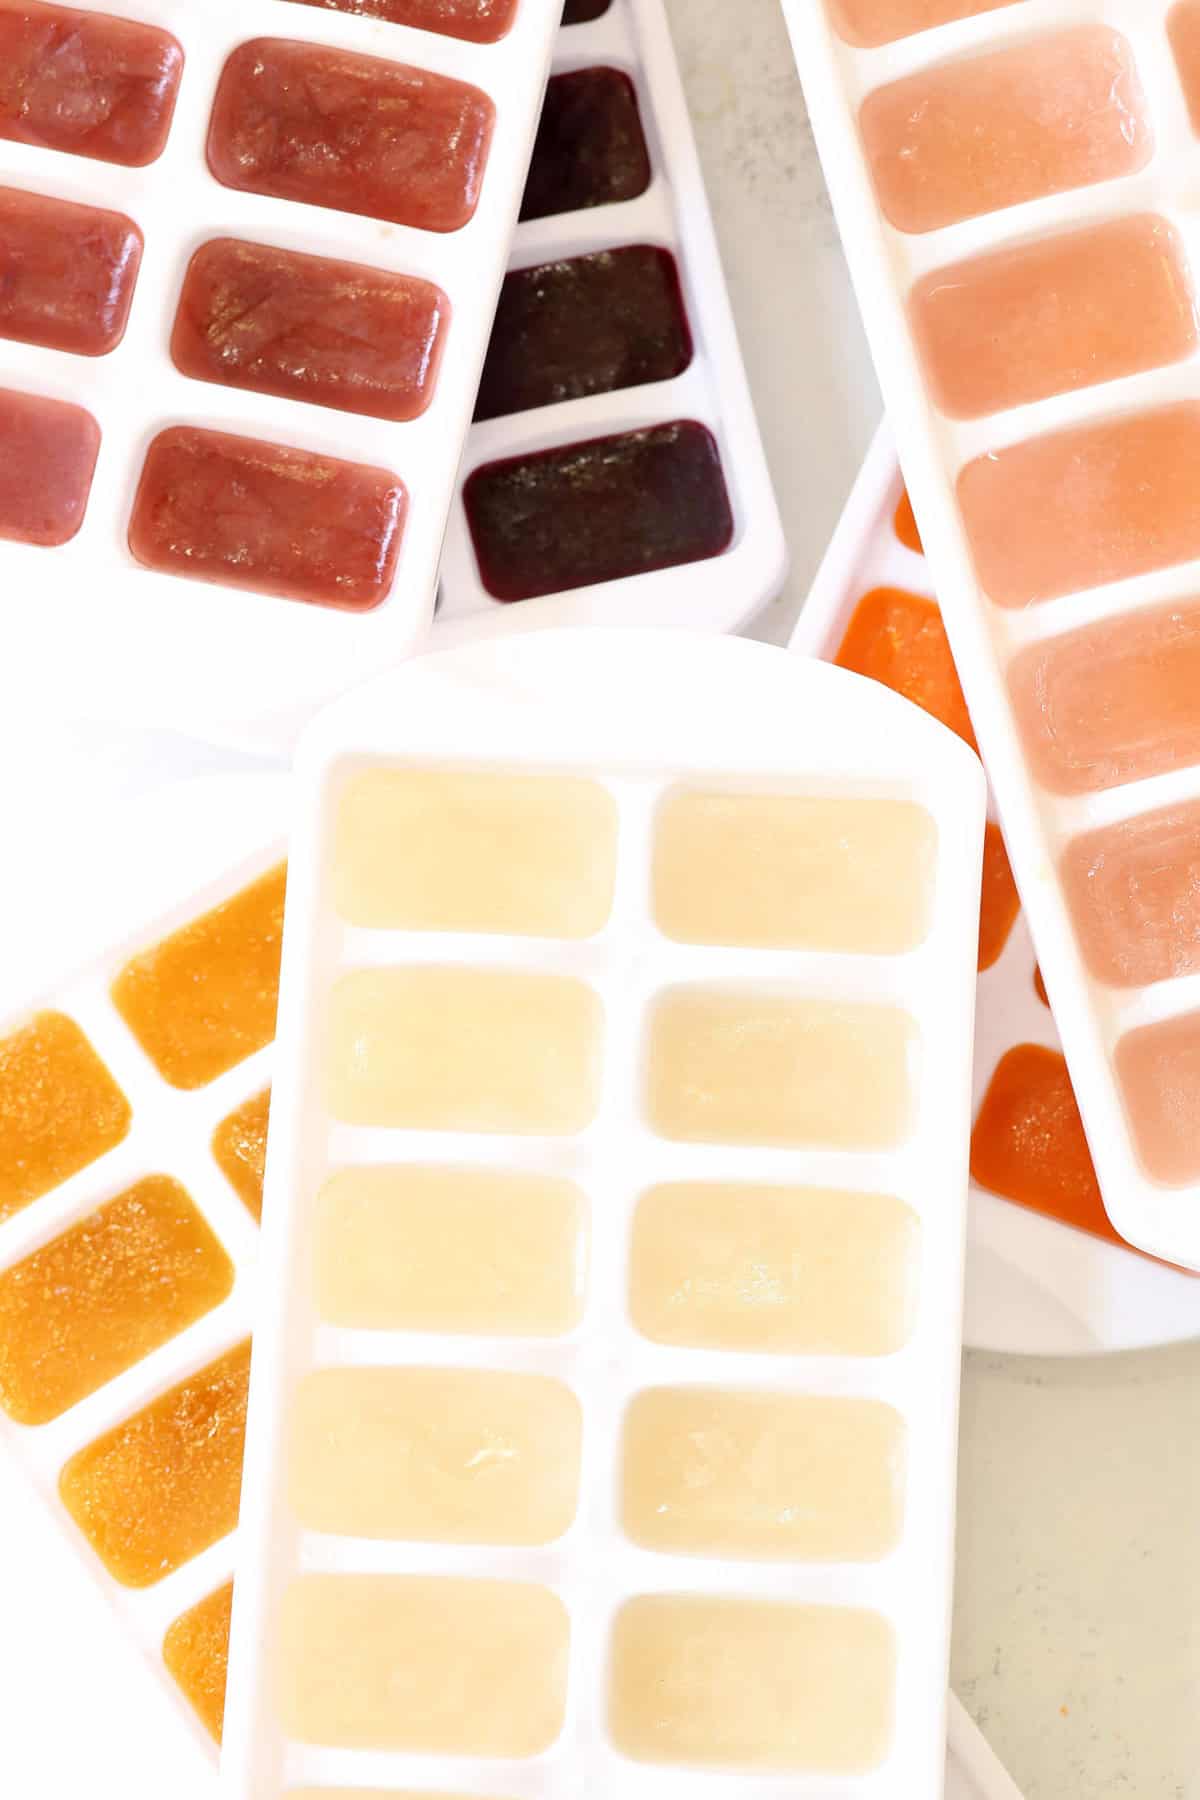 This new ice cube tray has been designed to freeze liquids in 10 minutes